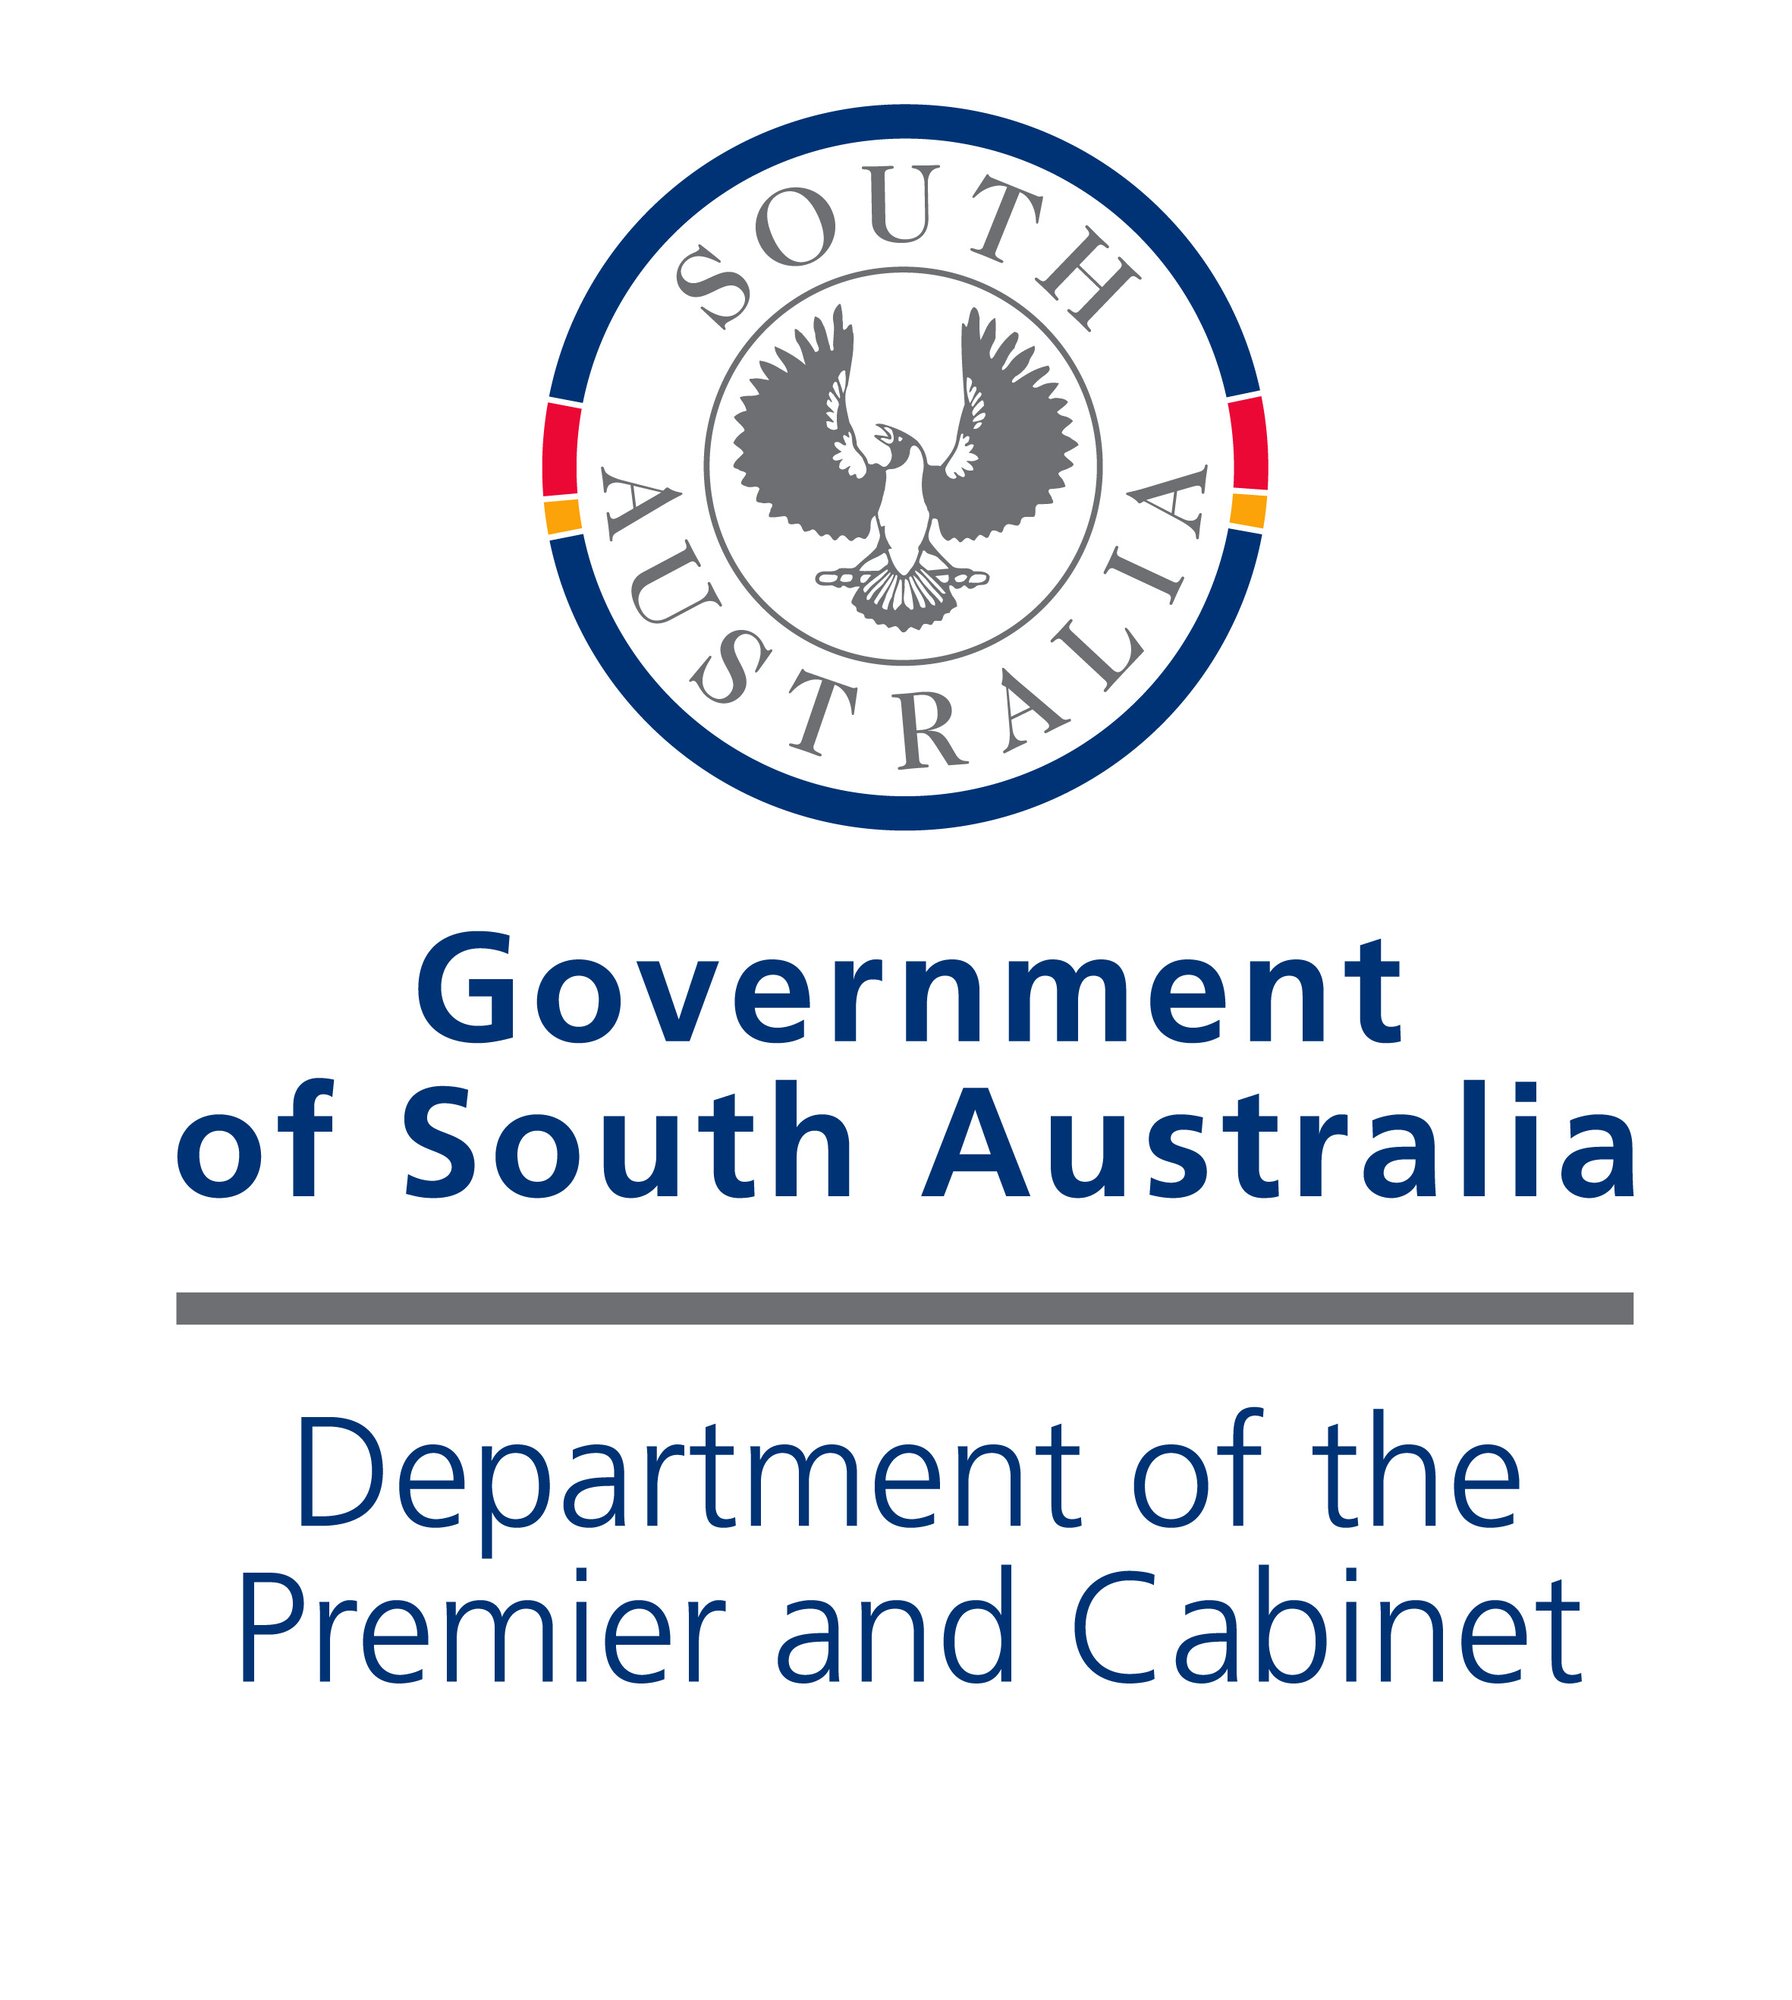 Department of Premier and Cabinet